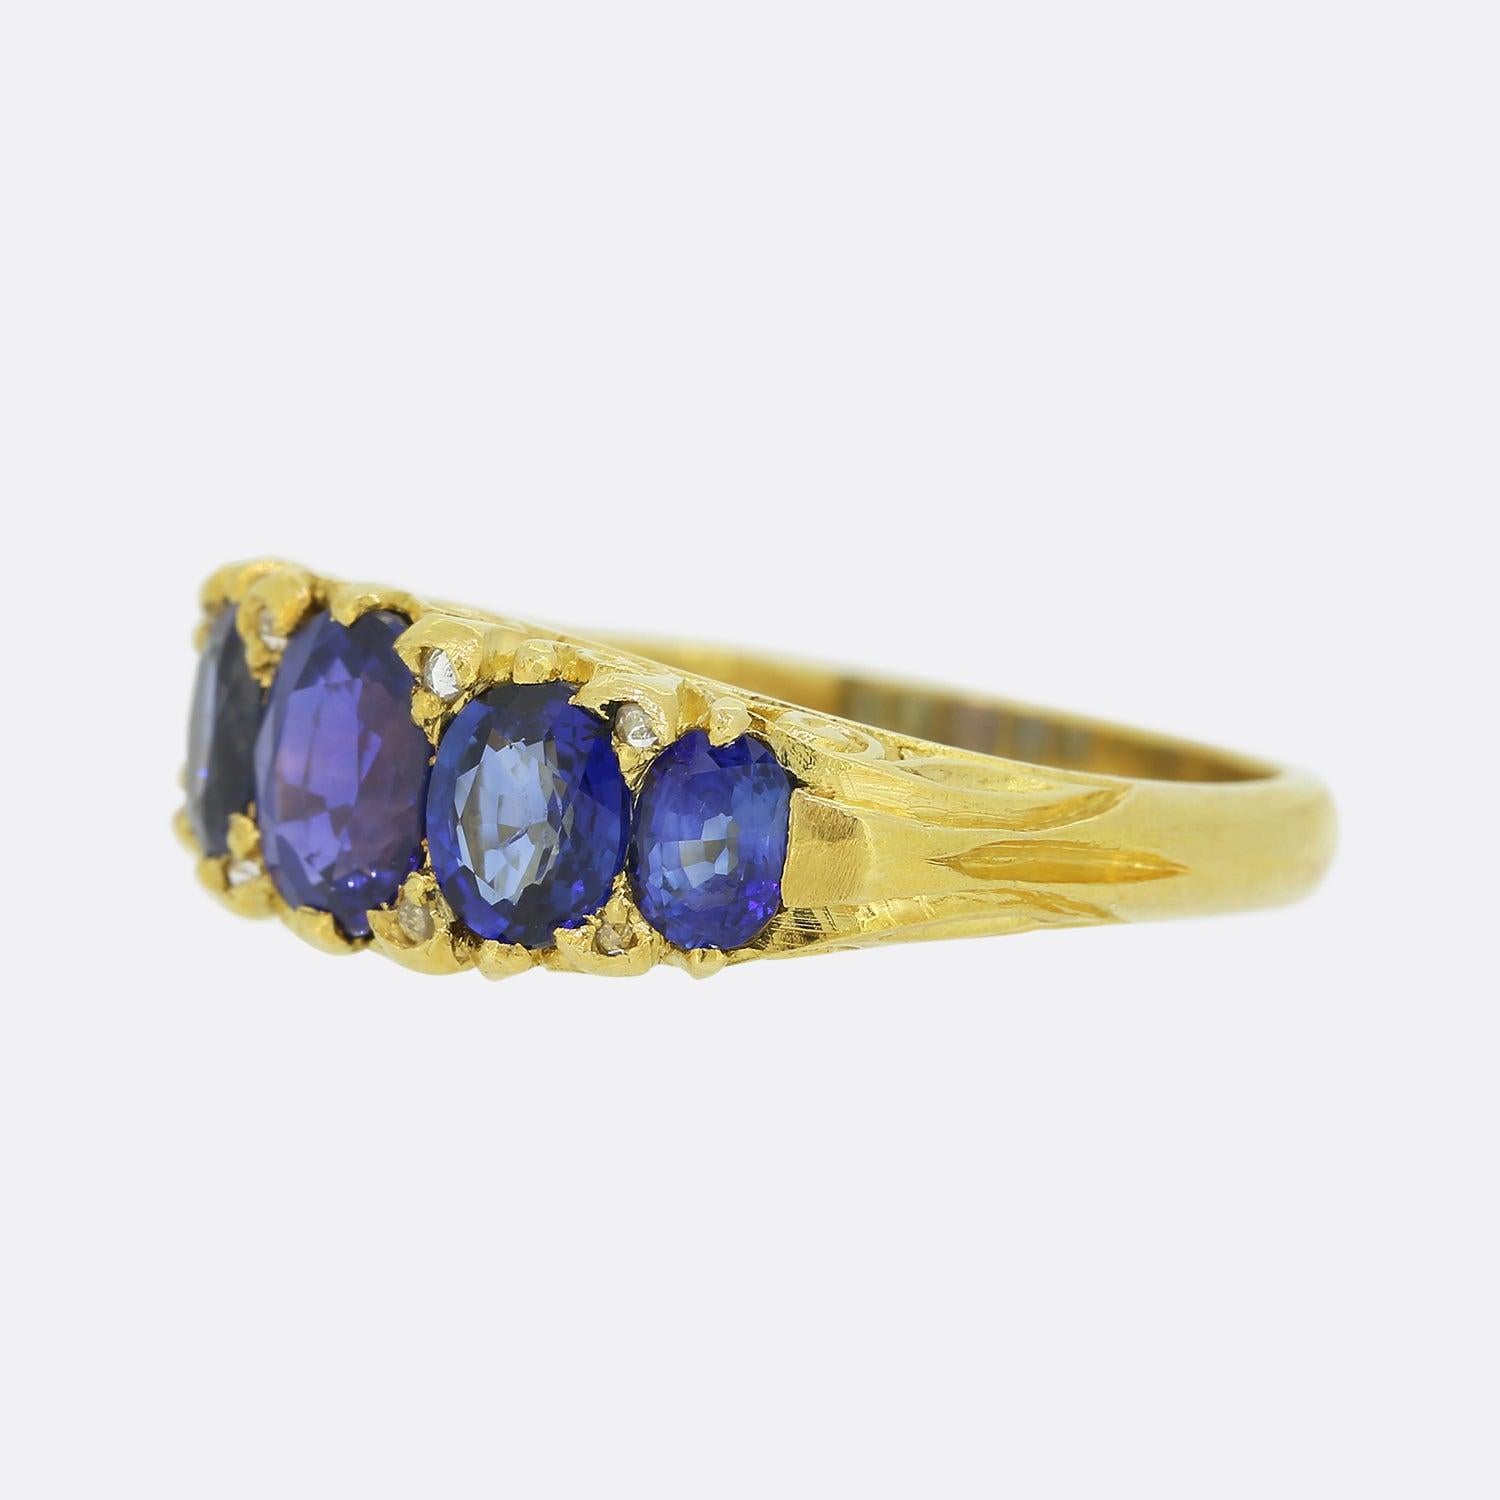 This is a beautiful 18ct yellow gold ring featuring five sensational sapphires spread across the face with two small rose cut diamonds nestled in between each. This piece demonstrates excellent craftsmanship borrowing from the Victorian period with